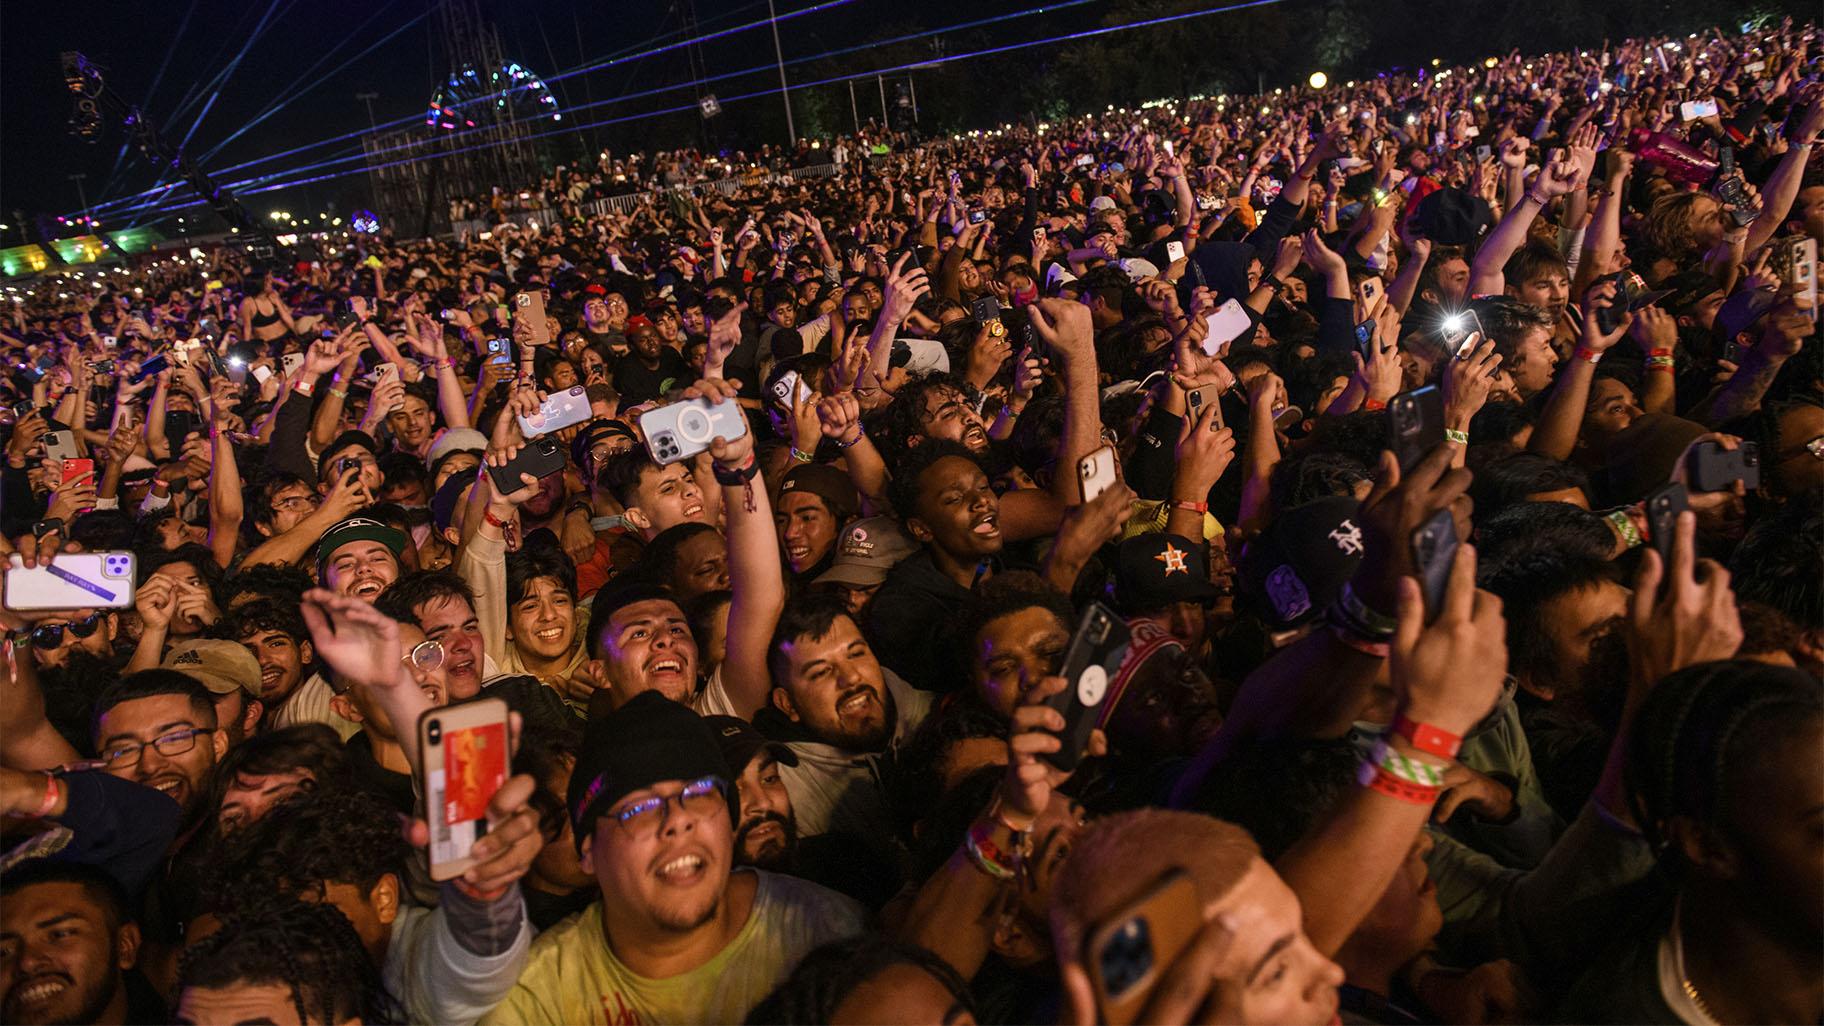 The crowd watches as Travis Scott performs at Astroworld Festival at NRG park on Friday, Nov. 5, 2021 in Houston.  (Jamaal Ellis / Houston Chronicle via AP)